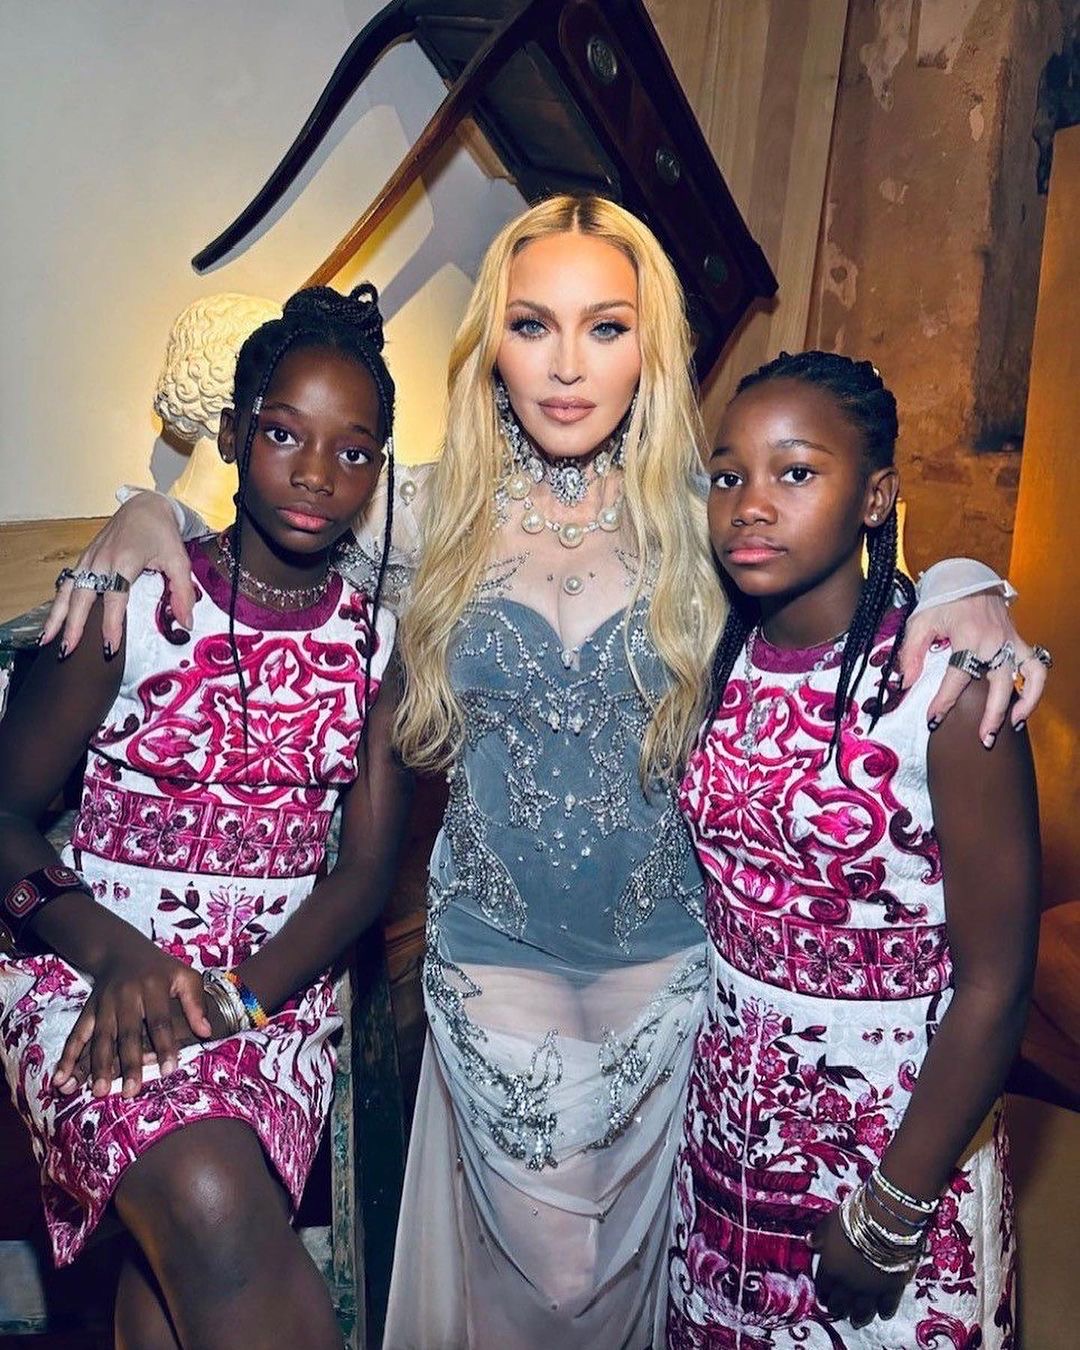 The Queen of Pop Madonna Celebrates Her 65th Birthday with Daughters Stella and Estere in Matching Dolce & Gabbana Majolica Prints